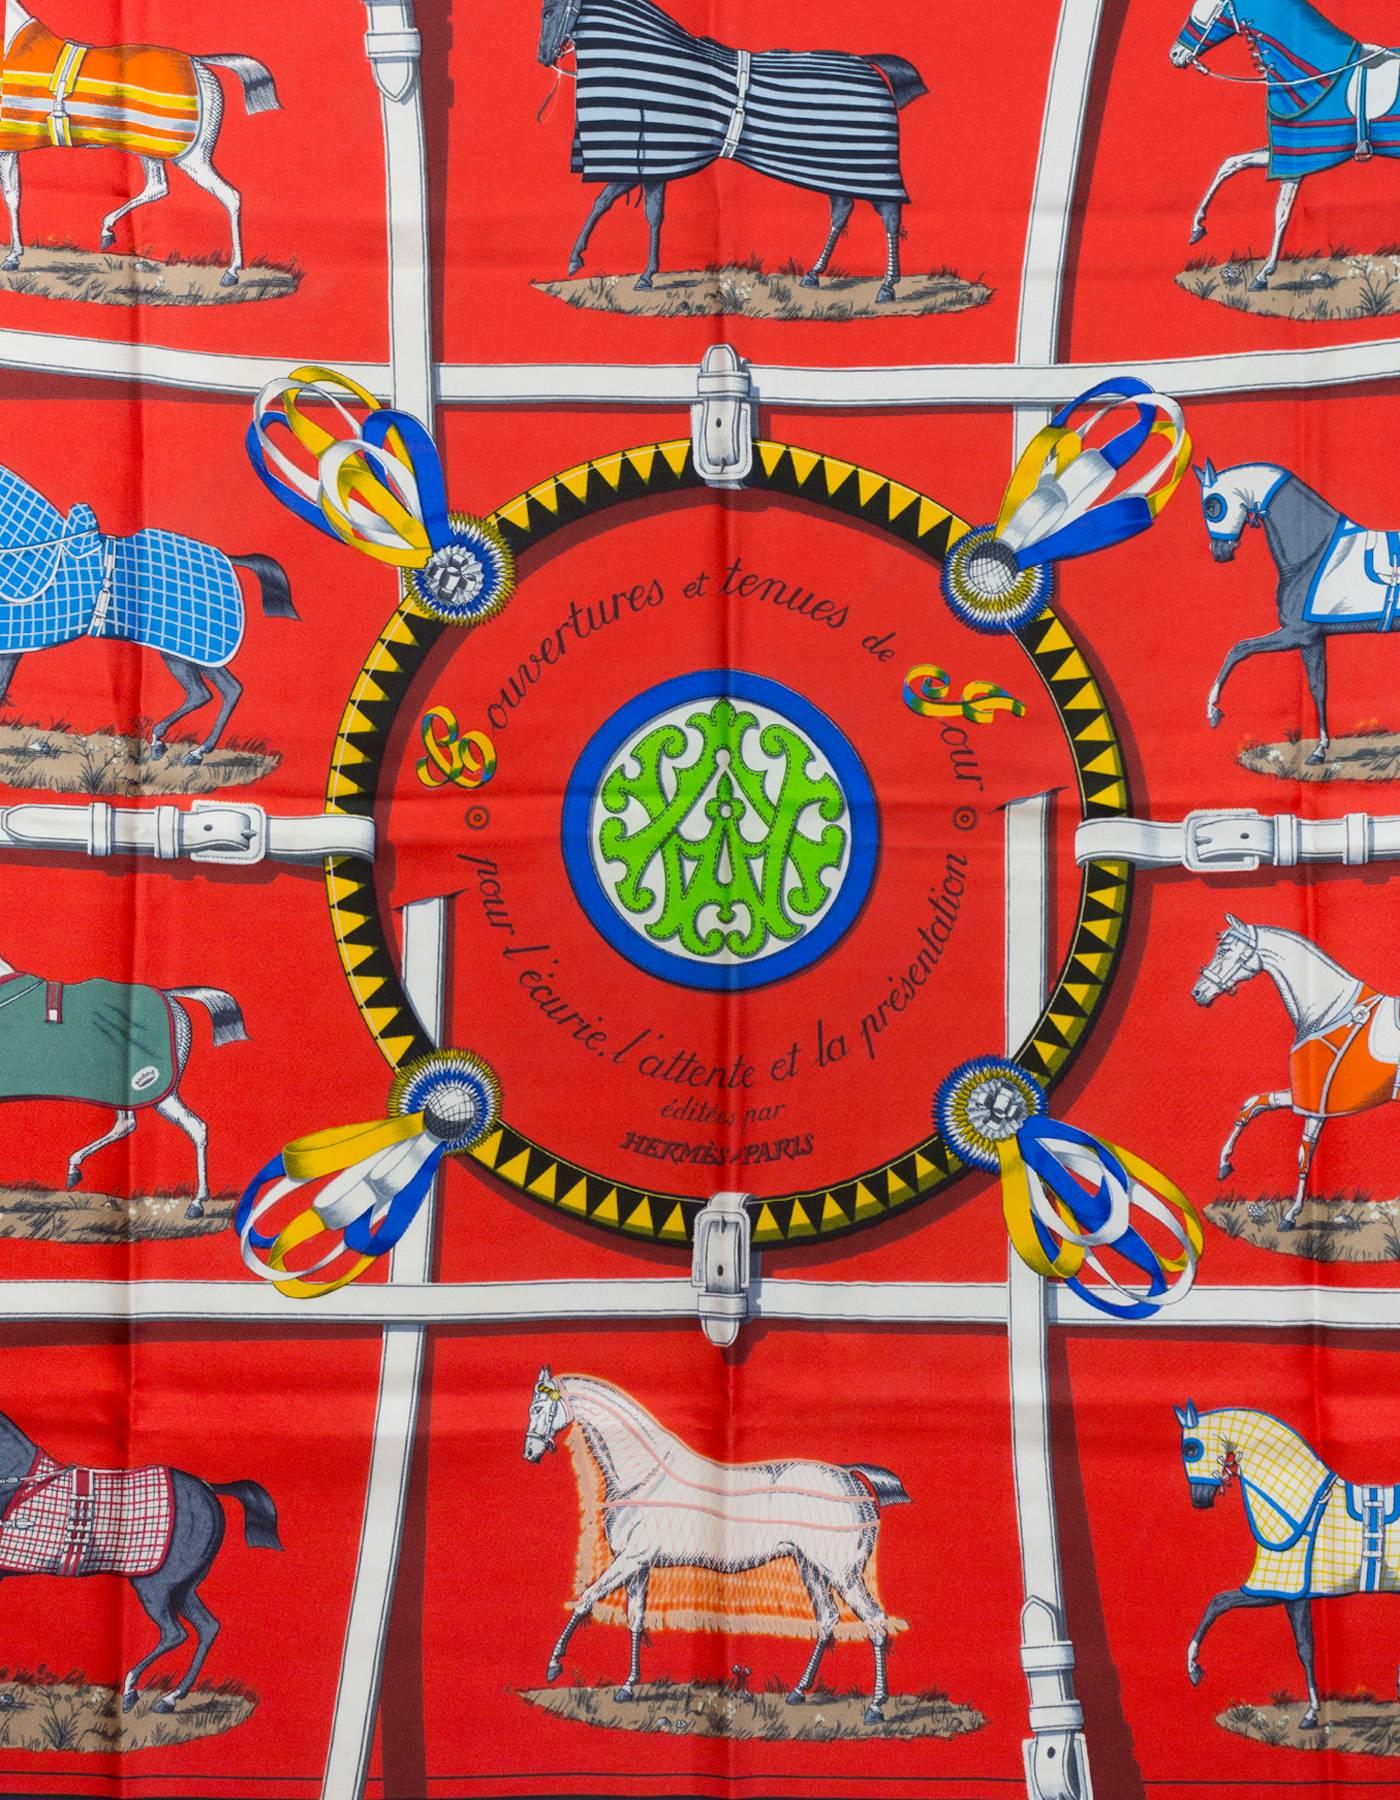 Hermes Covertures et Tenues de Jour Silk 90cm Scarf
Features race horse design

Made In: France
Color: Red, multi
Composition: 100% Silk
Retail Price: $395 + tax
Overall Condition: Excellent pre-owned condition

Measurements:
Length: 36"
Width: